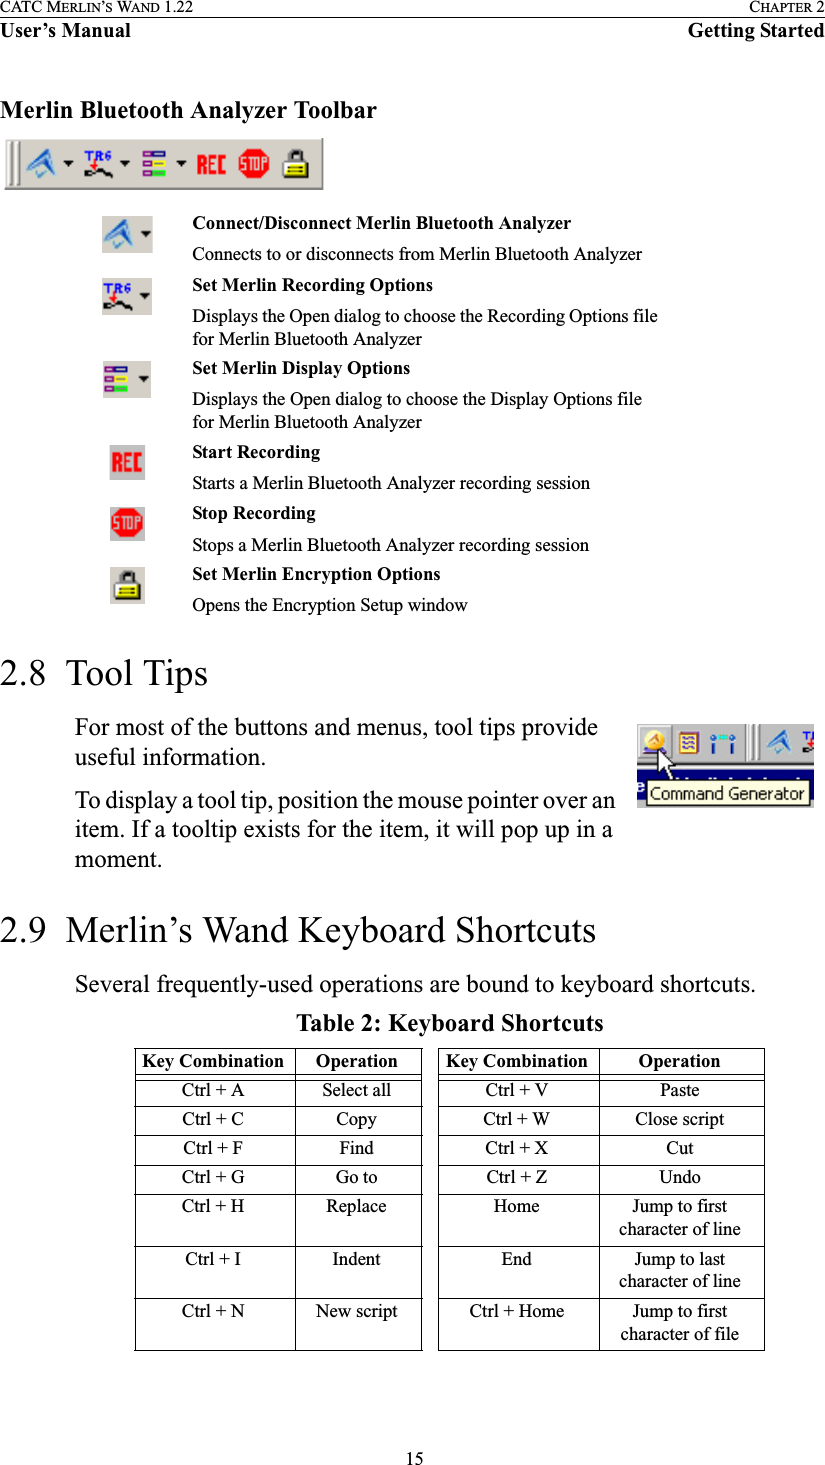  15CATC MERLIN’S WAND 1.22 CHAPTER 2User’s Manual Getting StartedMerlin Bluetooth Analyzer Toolbar2.8  Tool TipsFor most of the buttons and menus, tool tips provide useful information. To display a tool tip, position the mouse pointer over an item. If a tooltip exists for the item, it will pop up in a moment.2.9  Merlin’s Wand Keyboard ShortcutsSeveral frequently-used operations are bound to keyboard shortcuts. Connect/Disconnect Merlin Bluetooth AnalyzerConnects to or disconnects from Merlin Bluetooth AnalyzerSet Merlin Recording OptionsDisplays the Open dialog to choose the Recording Options file for Merlin Bluetooth AnalyzerSet Merlin Display OptionsDisplays the Open dialog to choose the Display Options file for Merlin Bluetooth AnalyzerStart RecordingStarts a Merlin Bluetooth Analyzer recording sessionStop RecordingStops a Merlin Bluetooth Analyzer recording sessionSet Merlin Encryption OptionsOpens the Encryption Setup windowTable 2: Keyboard ShortcutsKey Combination Operation Key Combination OperationCtrl + A Select all Ctrl + V PasteCtrl + C Copy Ctrl + W Close scriptCtrl + F Find Ctrl + X CutCtrl + G Go to Ctrl + Z UndoCtrl + H Replace Home Jump to first character of lineCtrl + I Indent End Jump to last character of lineCtrl + N New script Ctrl + Home Jump to first character of file